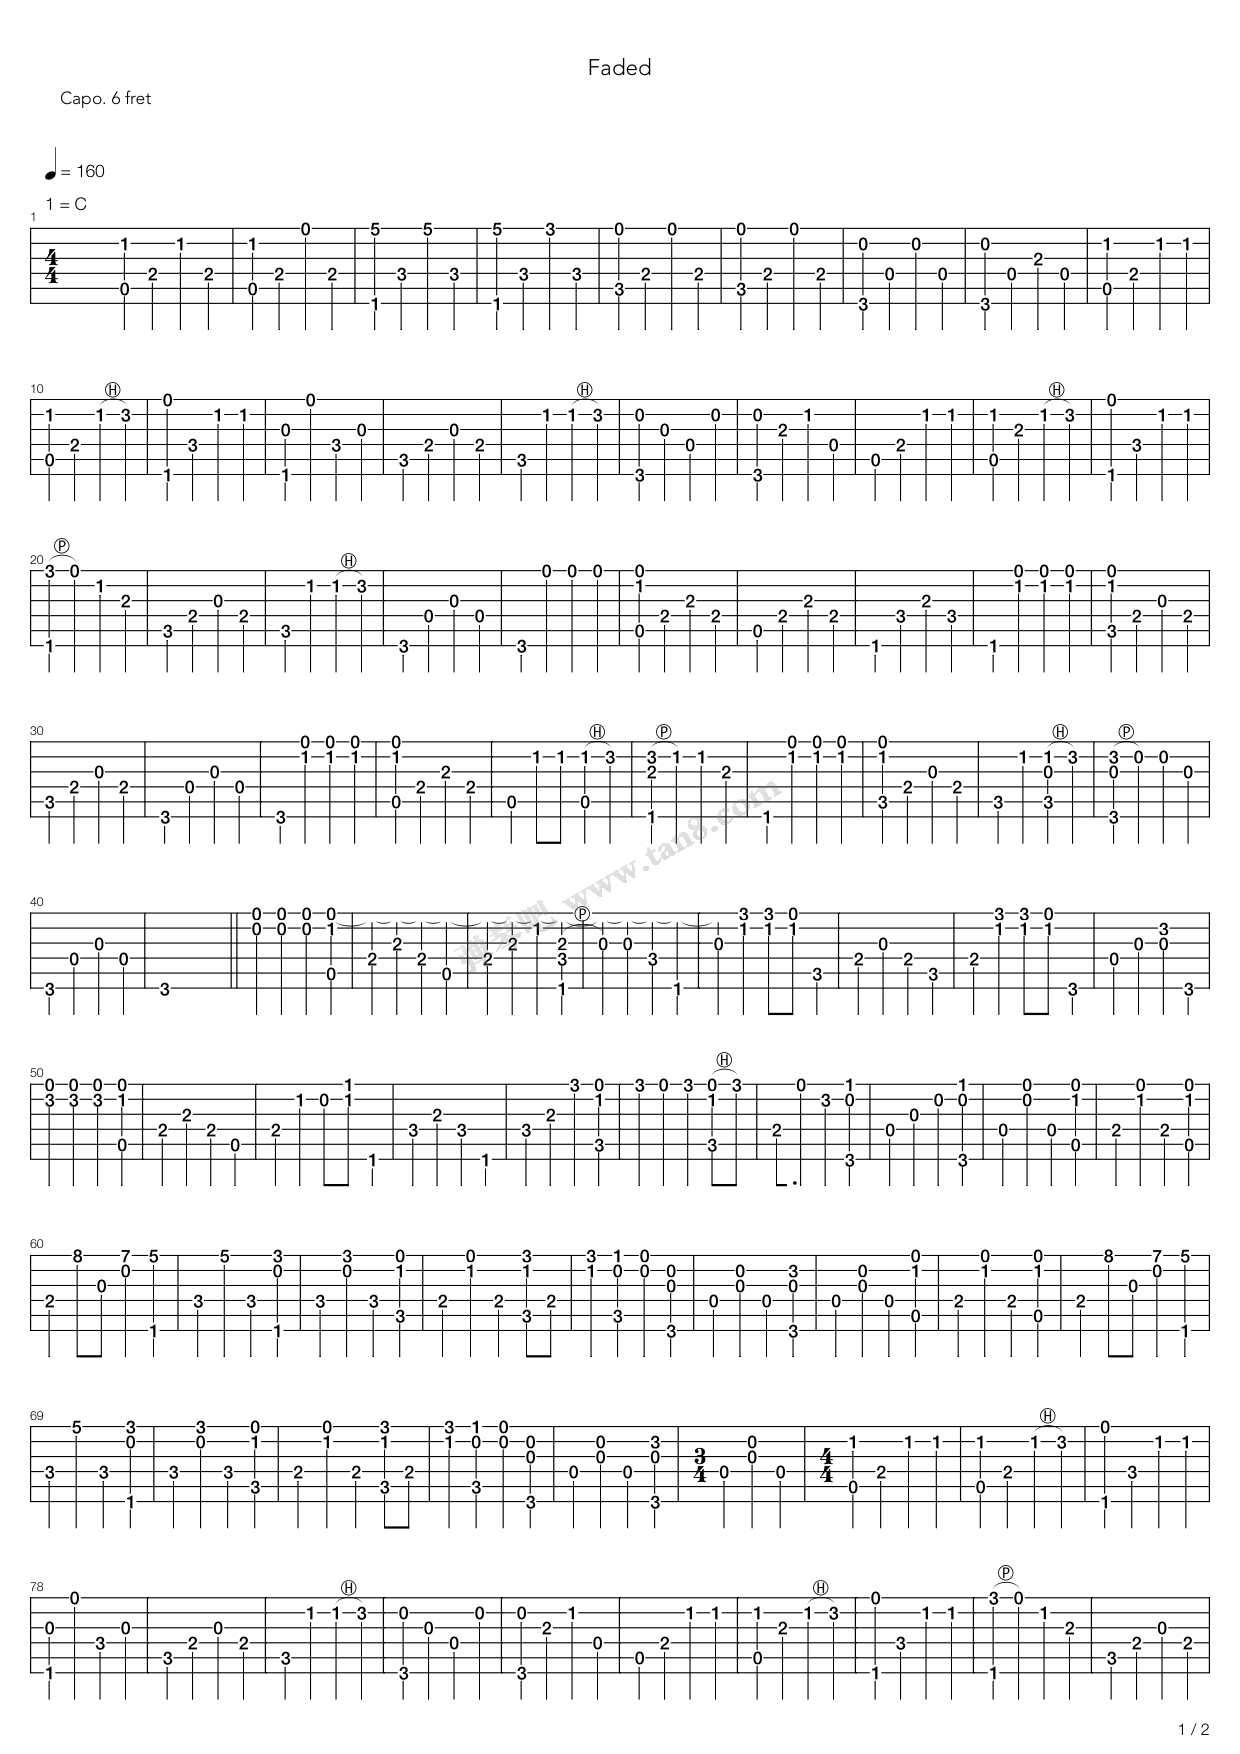 Faded By Alan Walker Solo Guitar Tabs Chords Sheet Music Free Learnguitarsonline Com